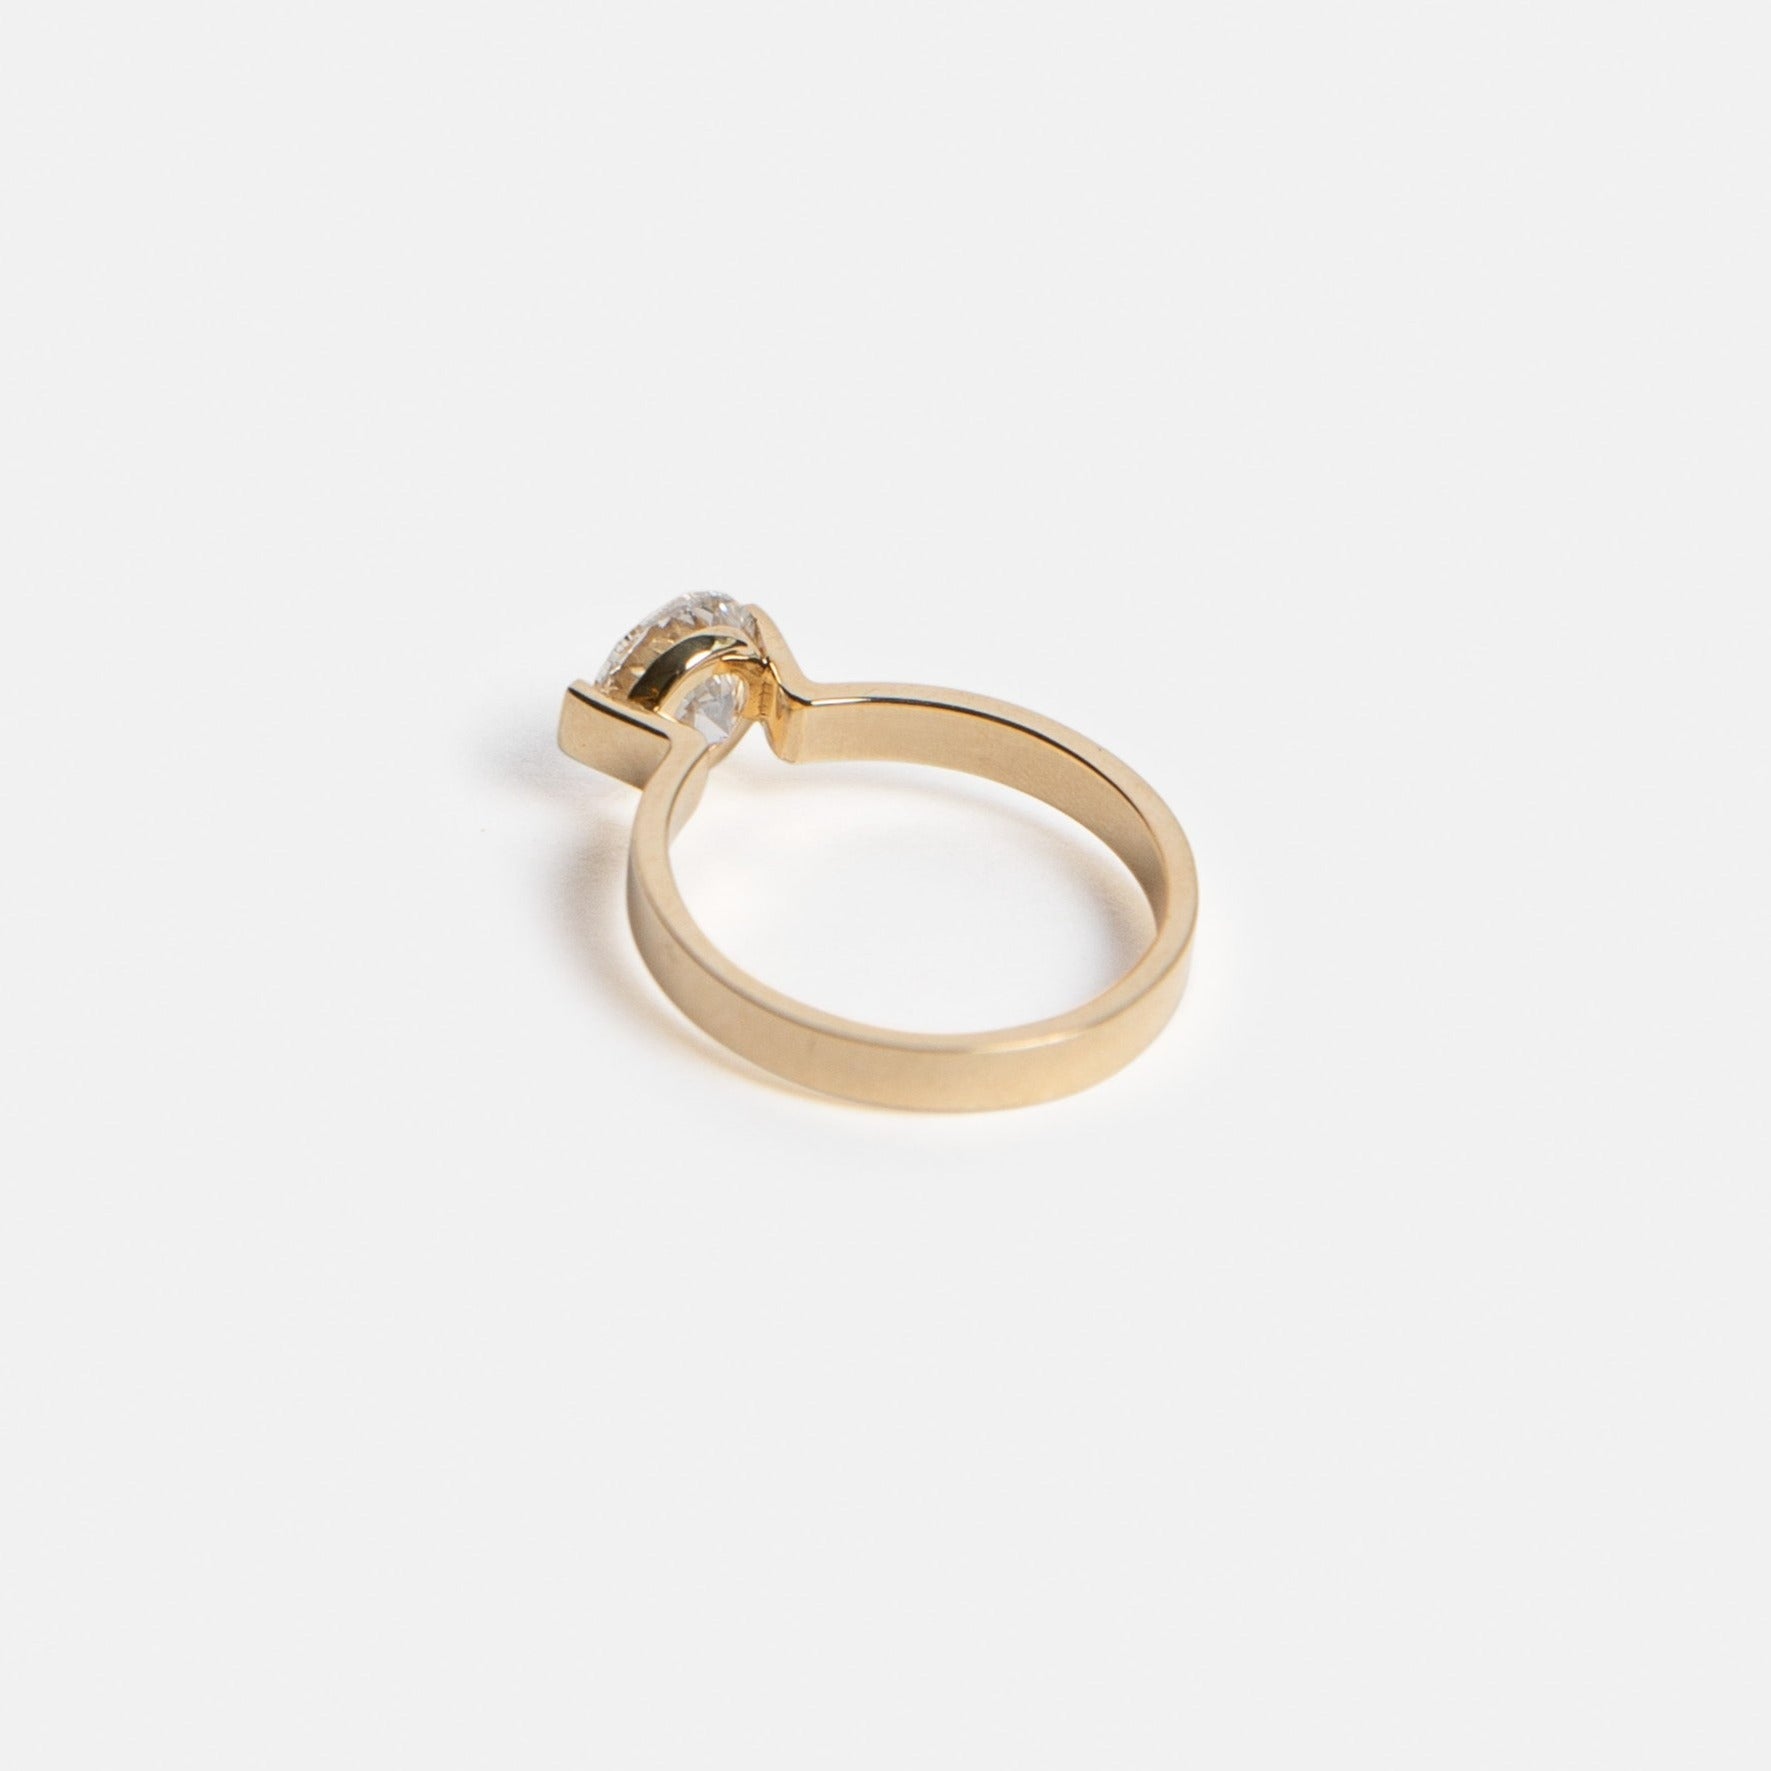 Lara Designer Engagement Ring in 14k Gold set with an excellent cut lab-grown diamond By SHW Fine Jewelry NYC